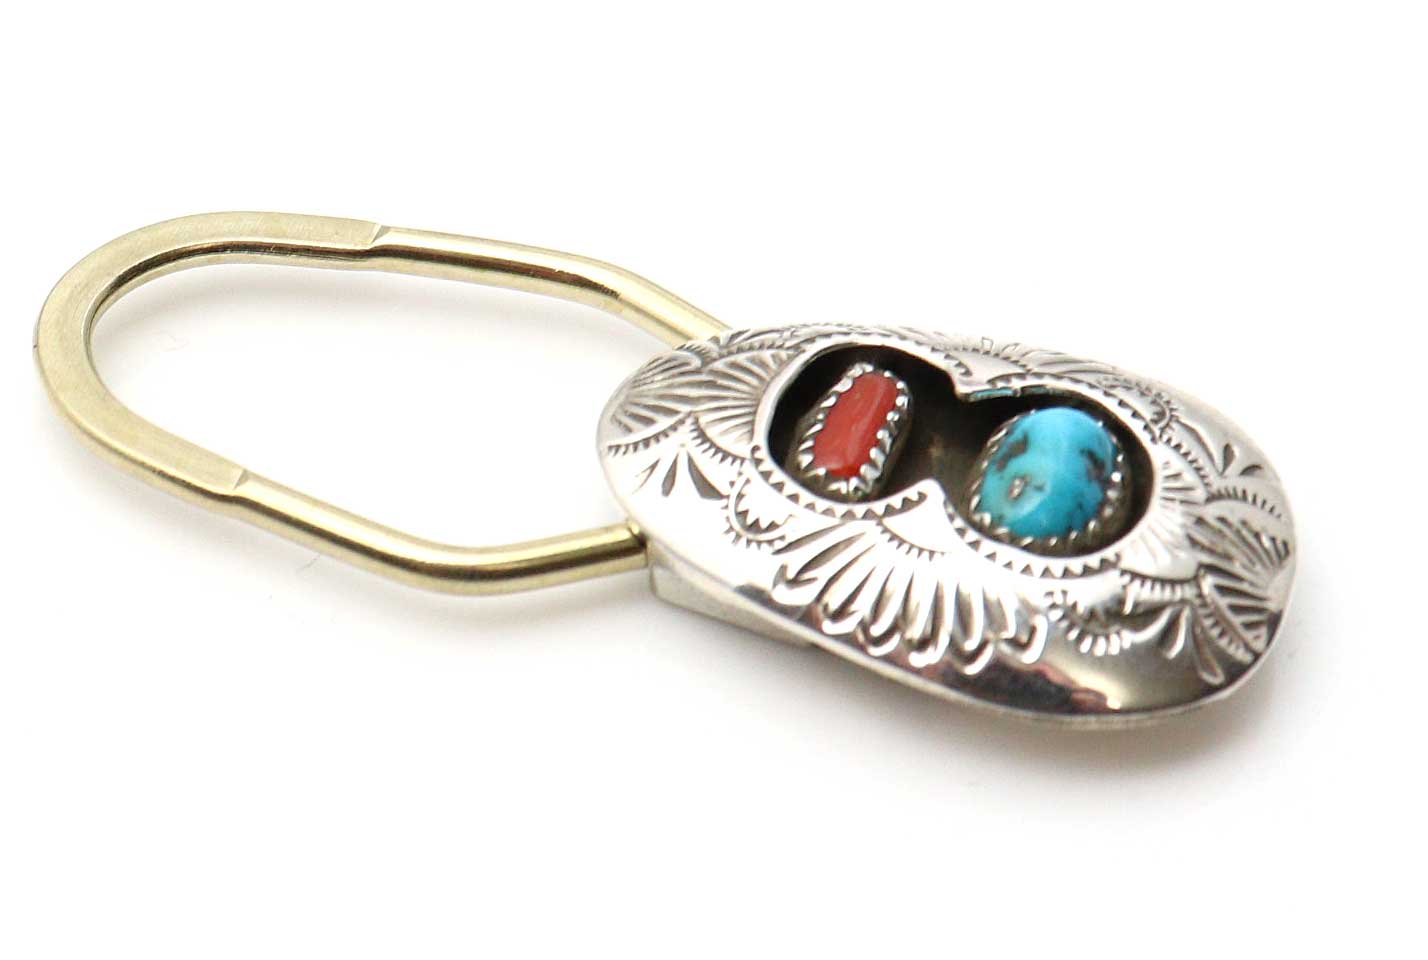 Turquoise & Coral Key Ring by Skeets